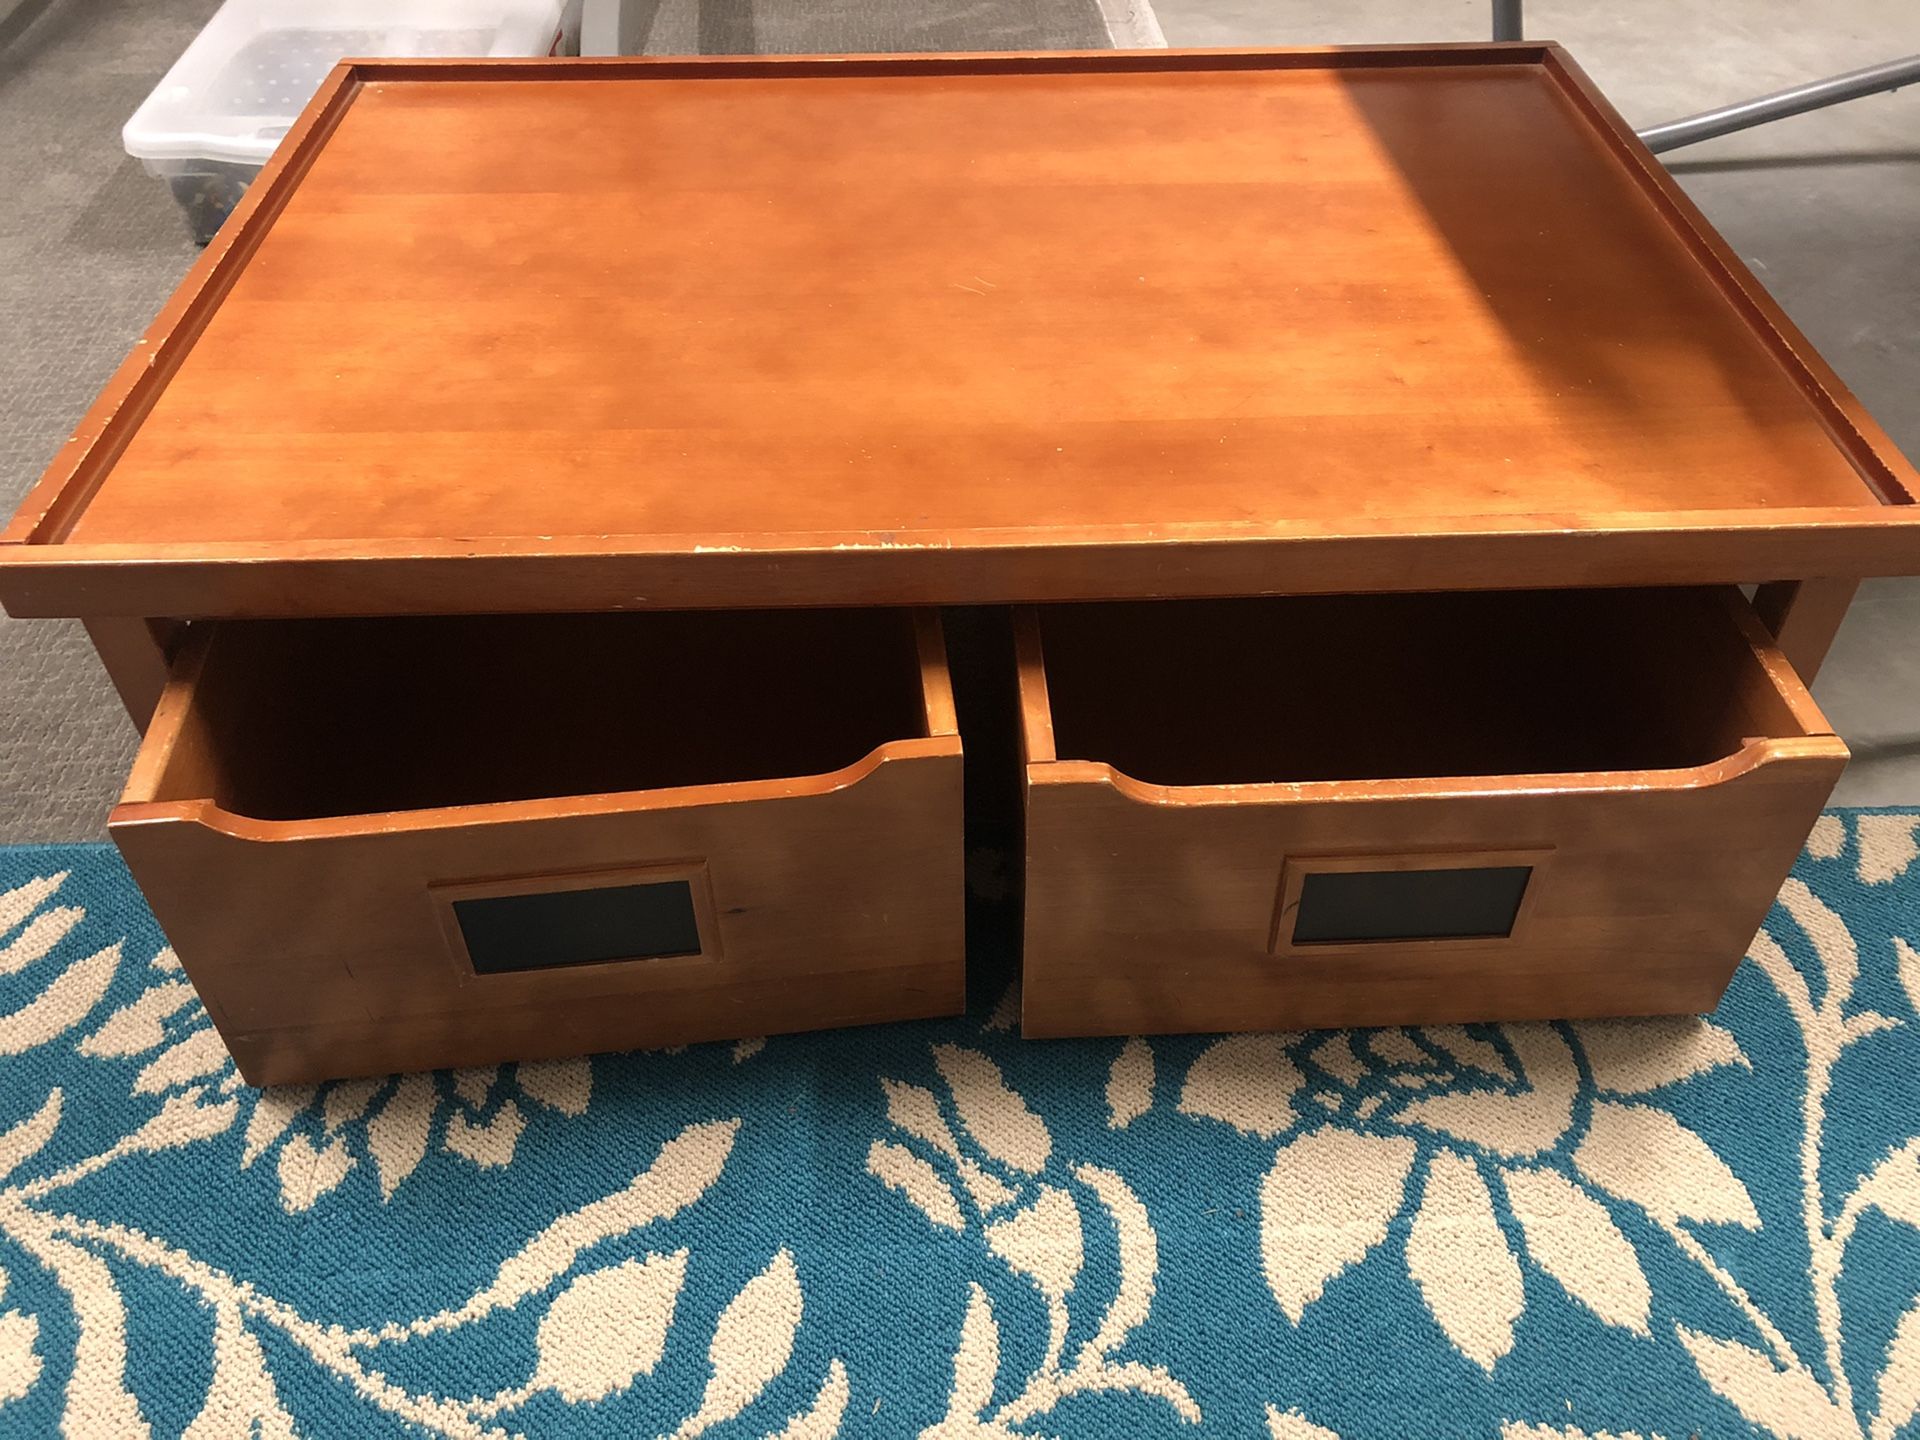 Play table with drawers on wheels